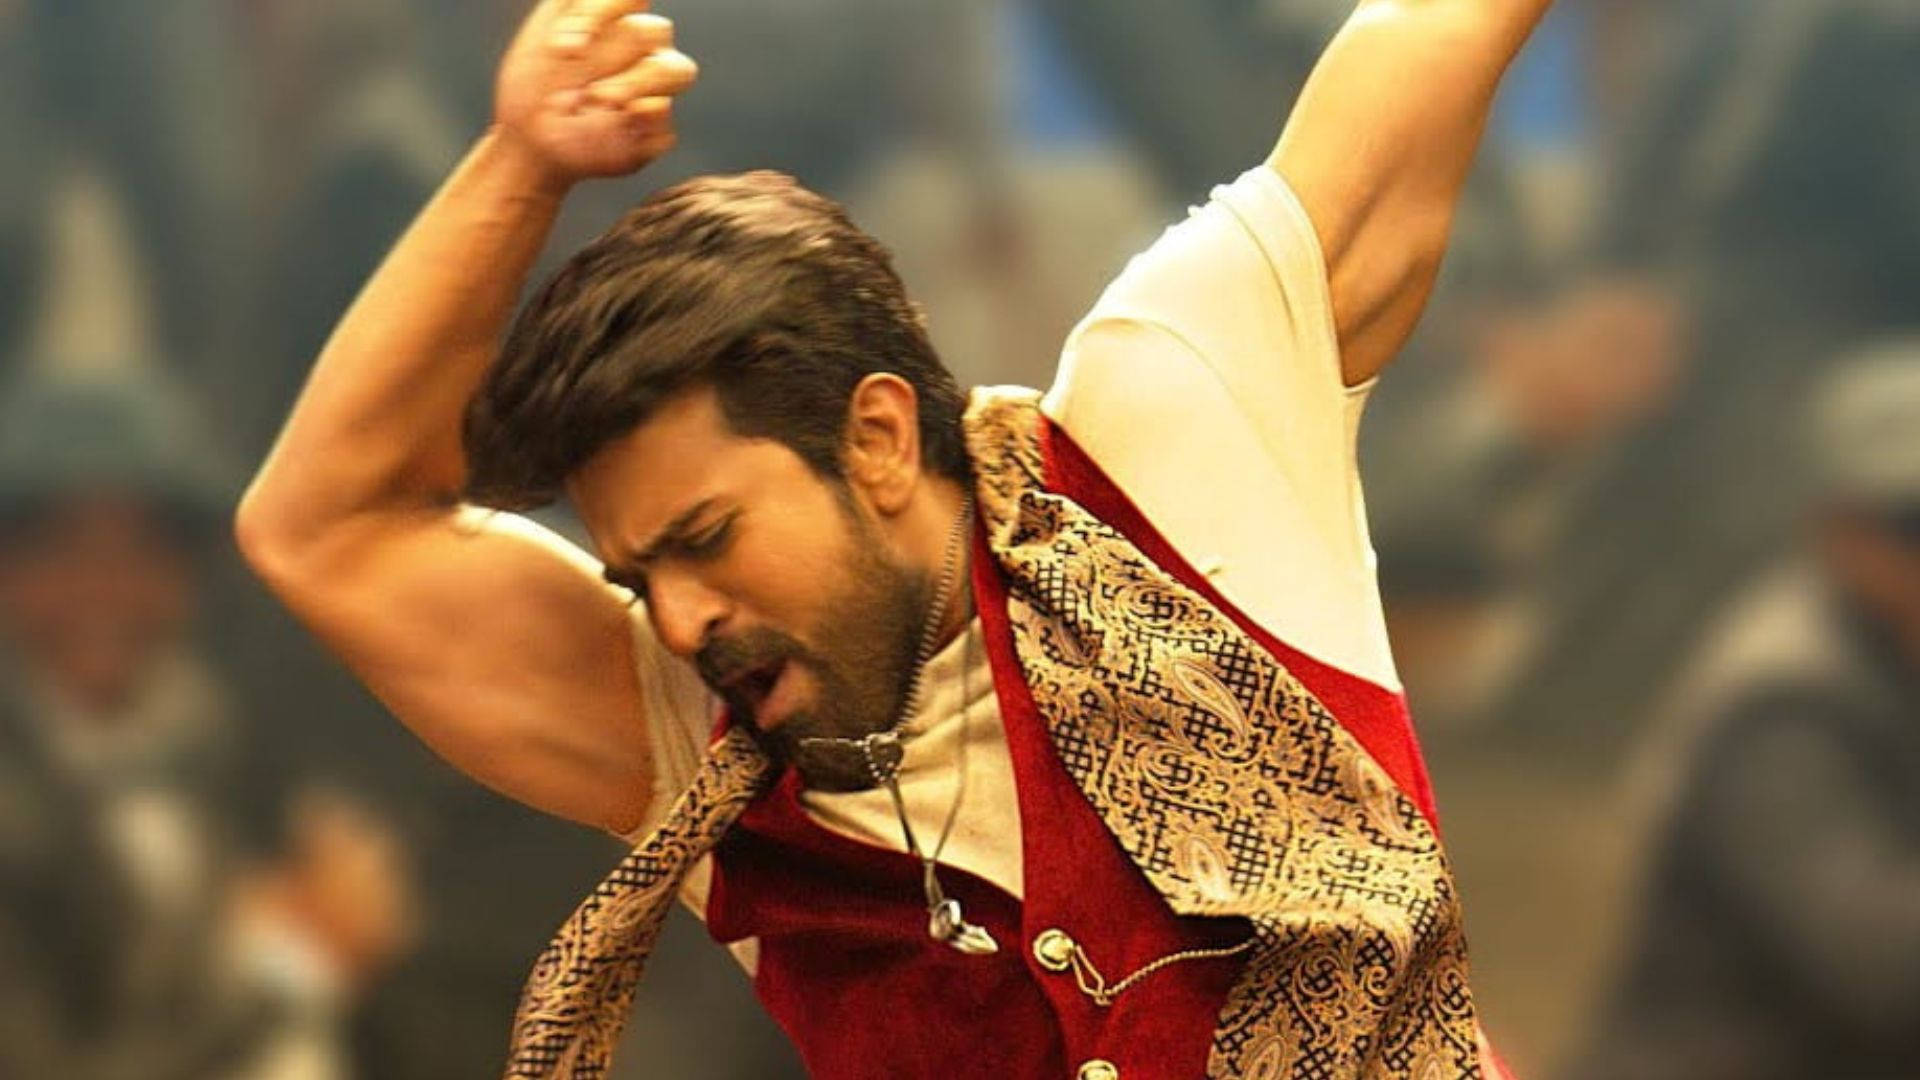 Dynamic Ram Charan Exhibiting His Dance Moves In Hd. Background